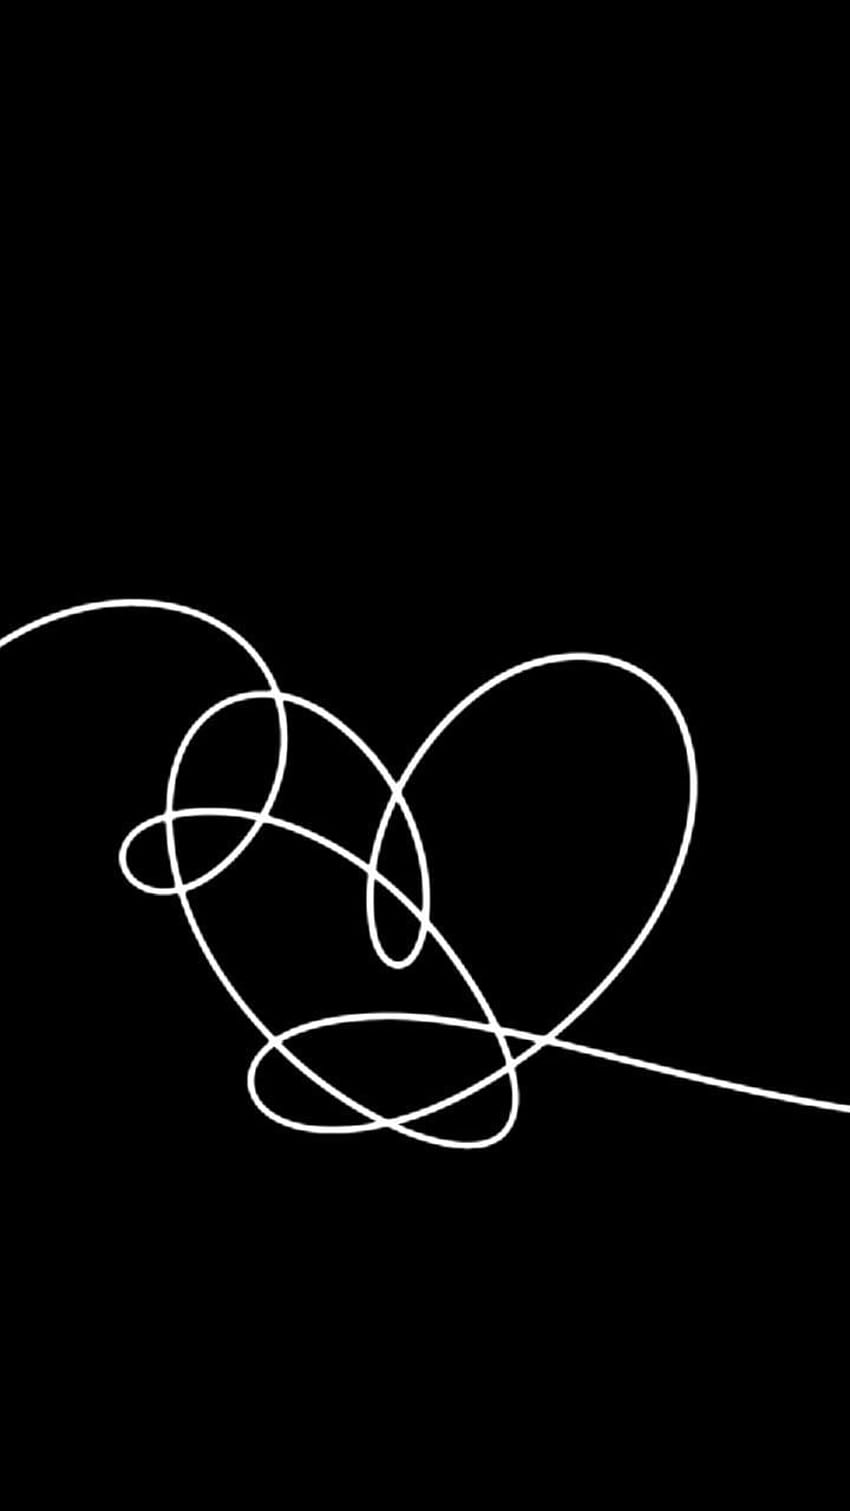 BTS[Love yourself-Tear] Logo by Bai by Siguo on DeviantArt